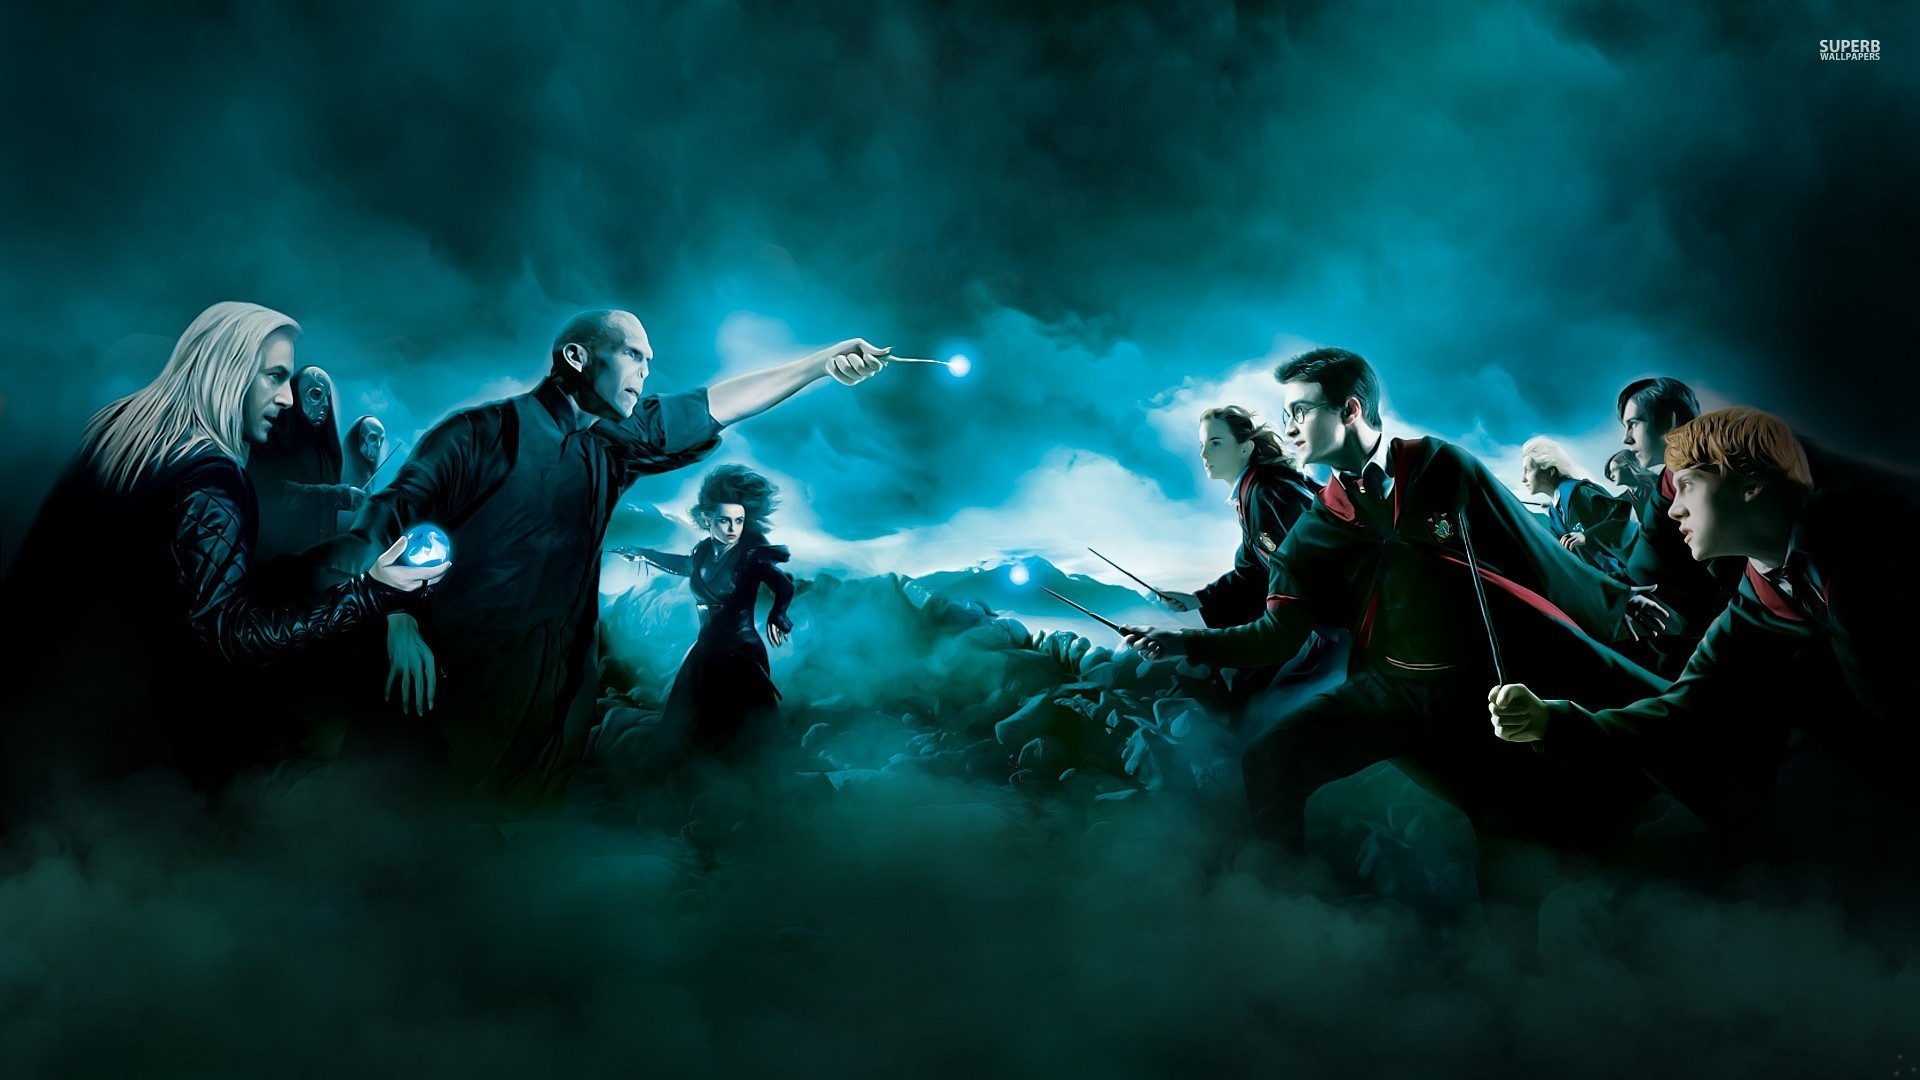 1920x1080 Harry Potter and the Deathly Hallows -Part 2 wallpaper - Movie .